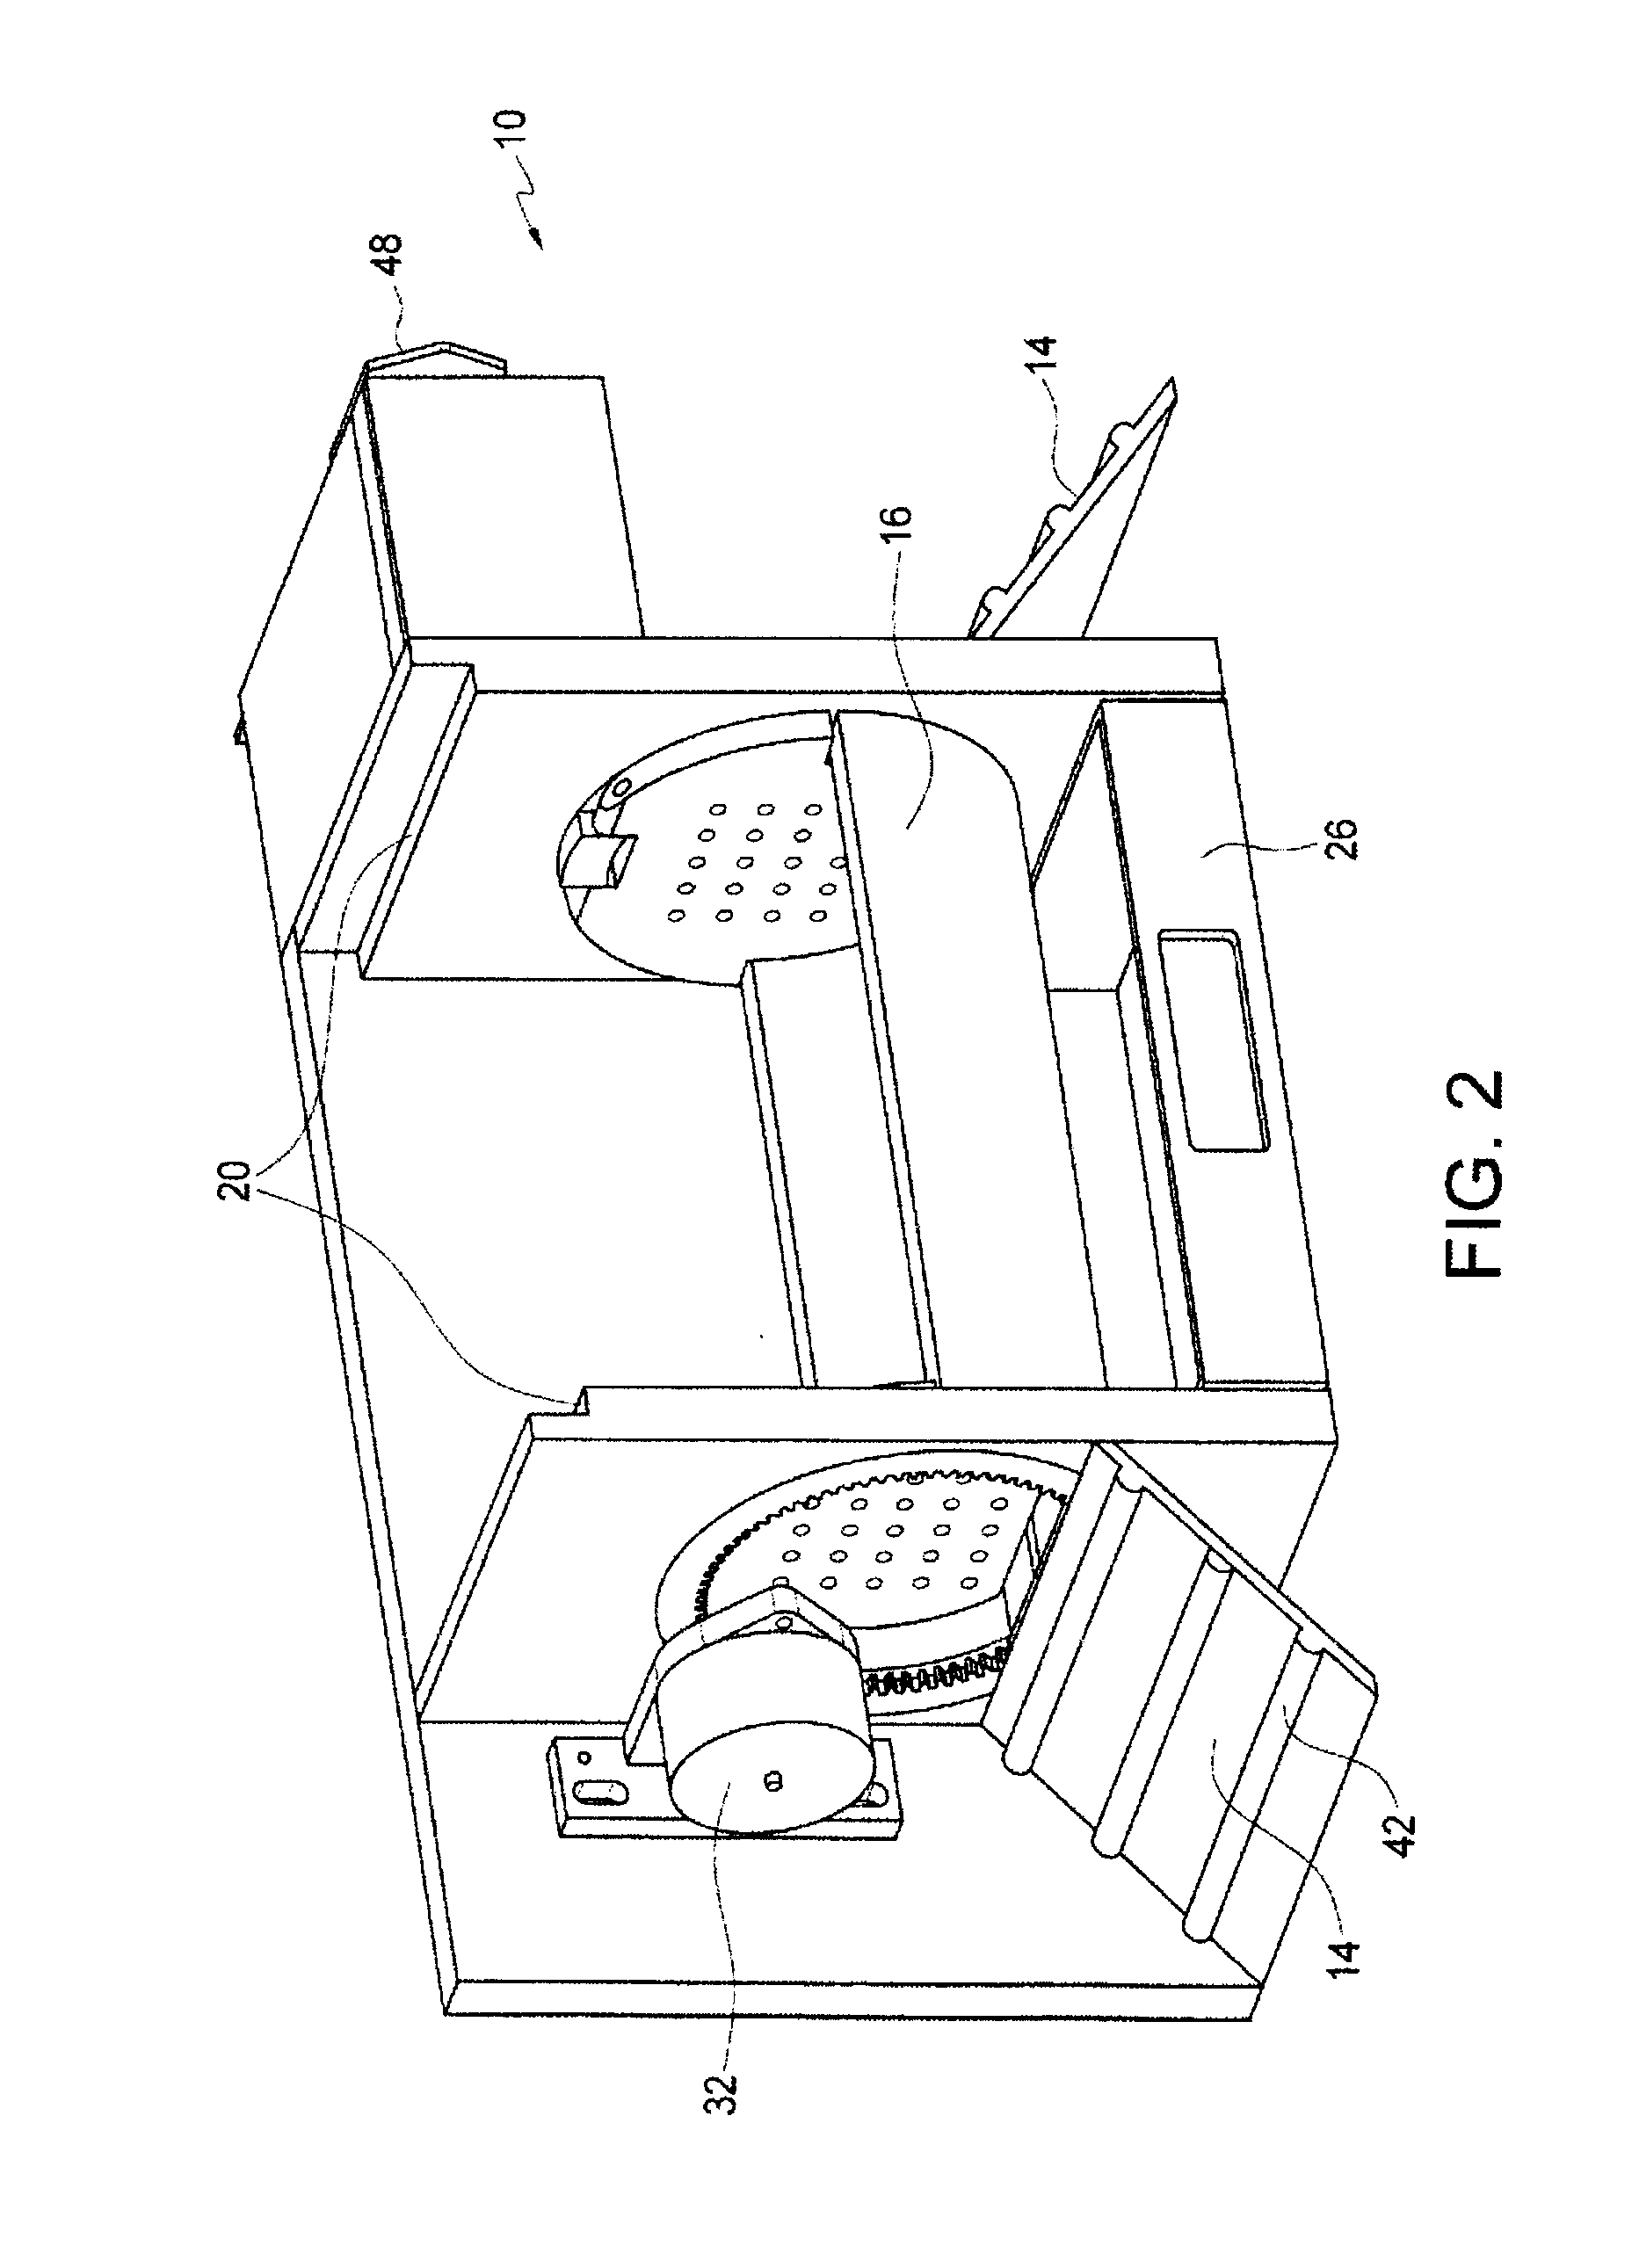 Multiple-use vermin trap apparatus, method and system